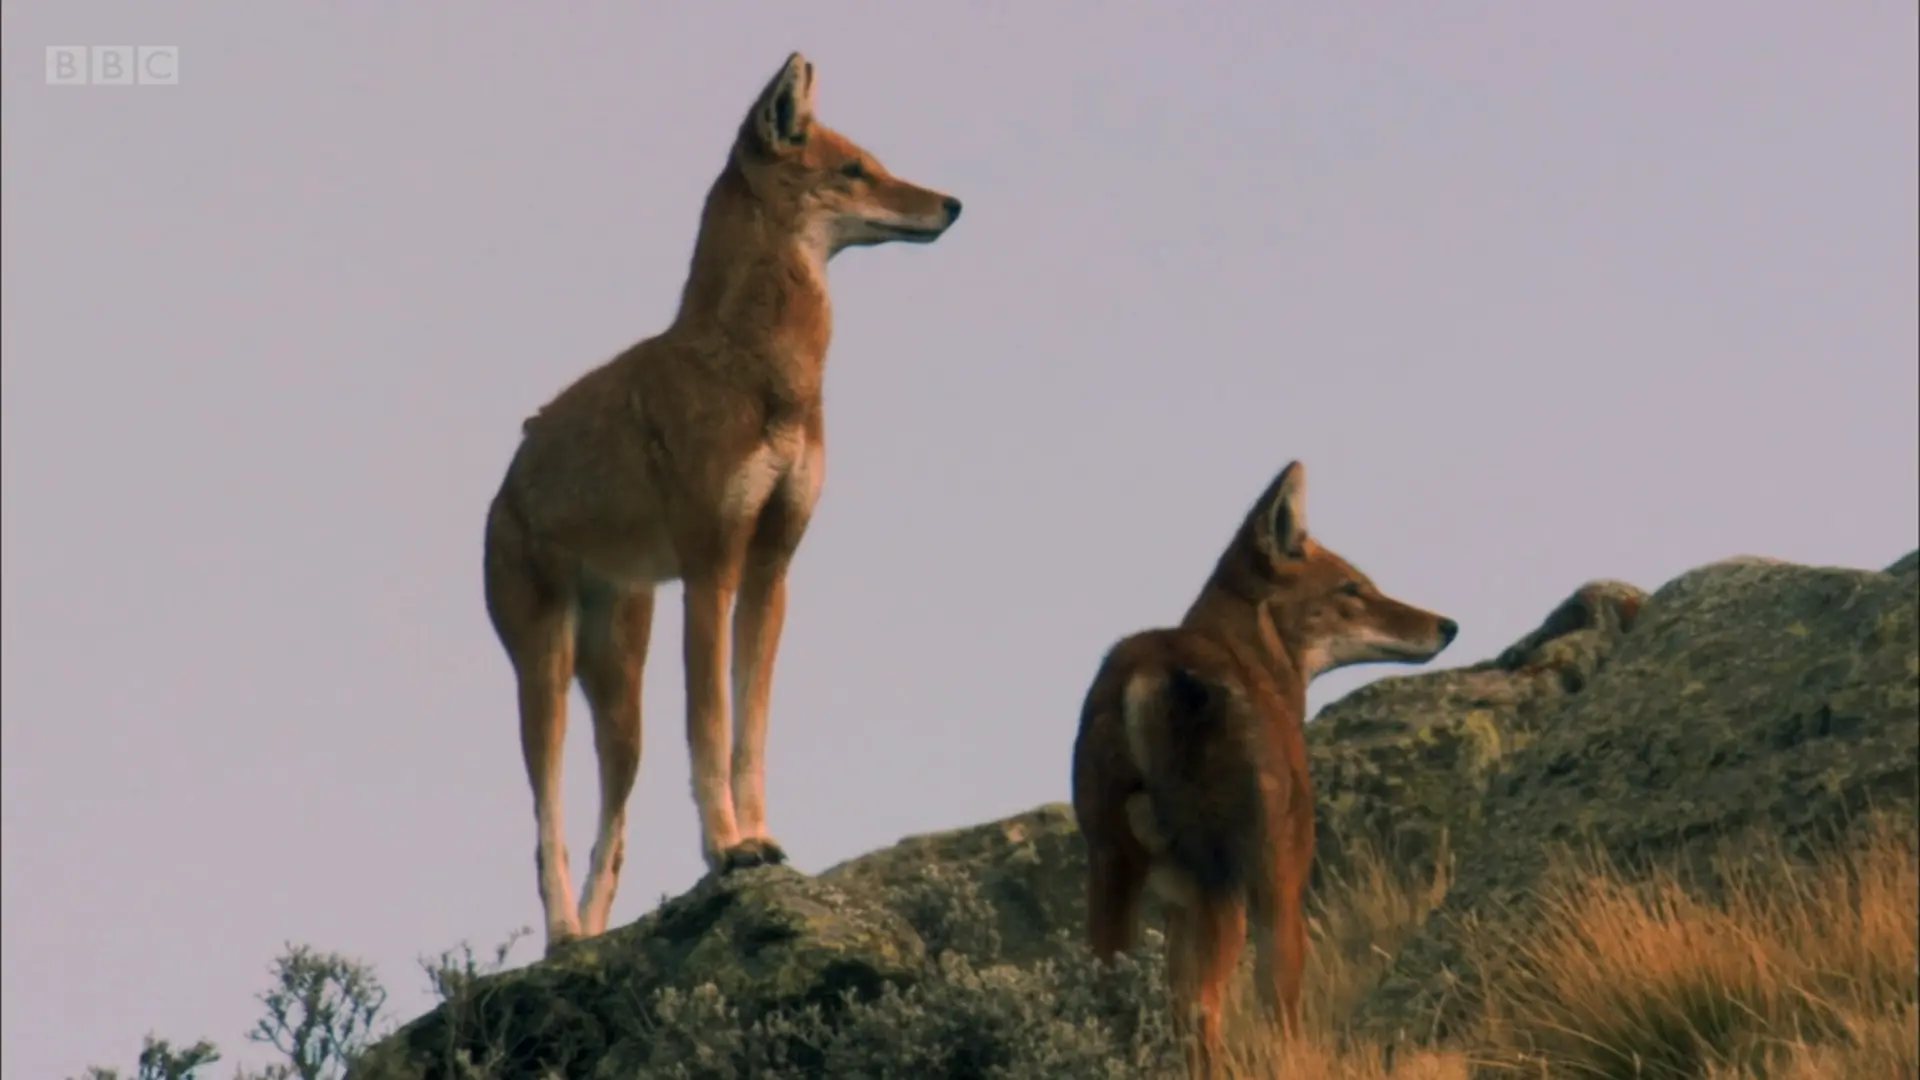 Nothern Ethiopian wolf (Canis simensis simensis) as shown in Planet Earth - Mountains